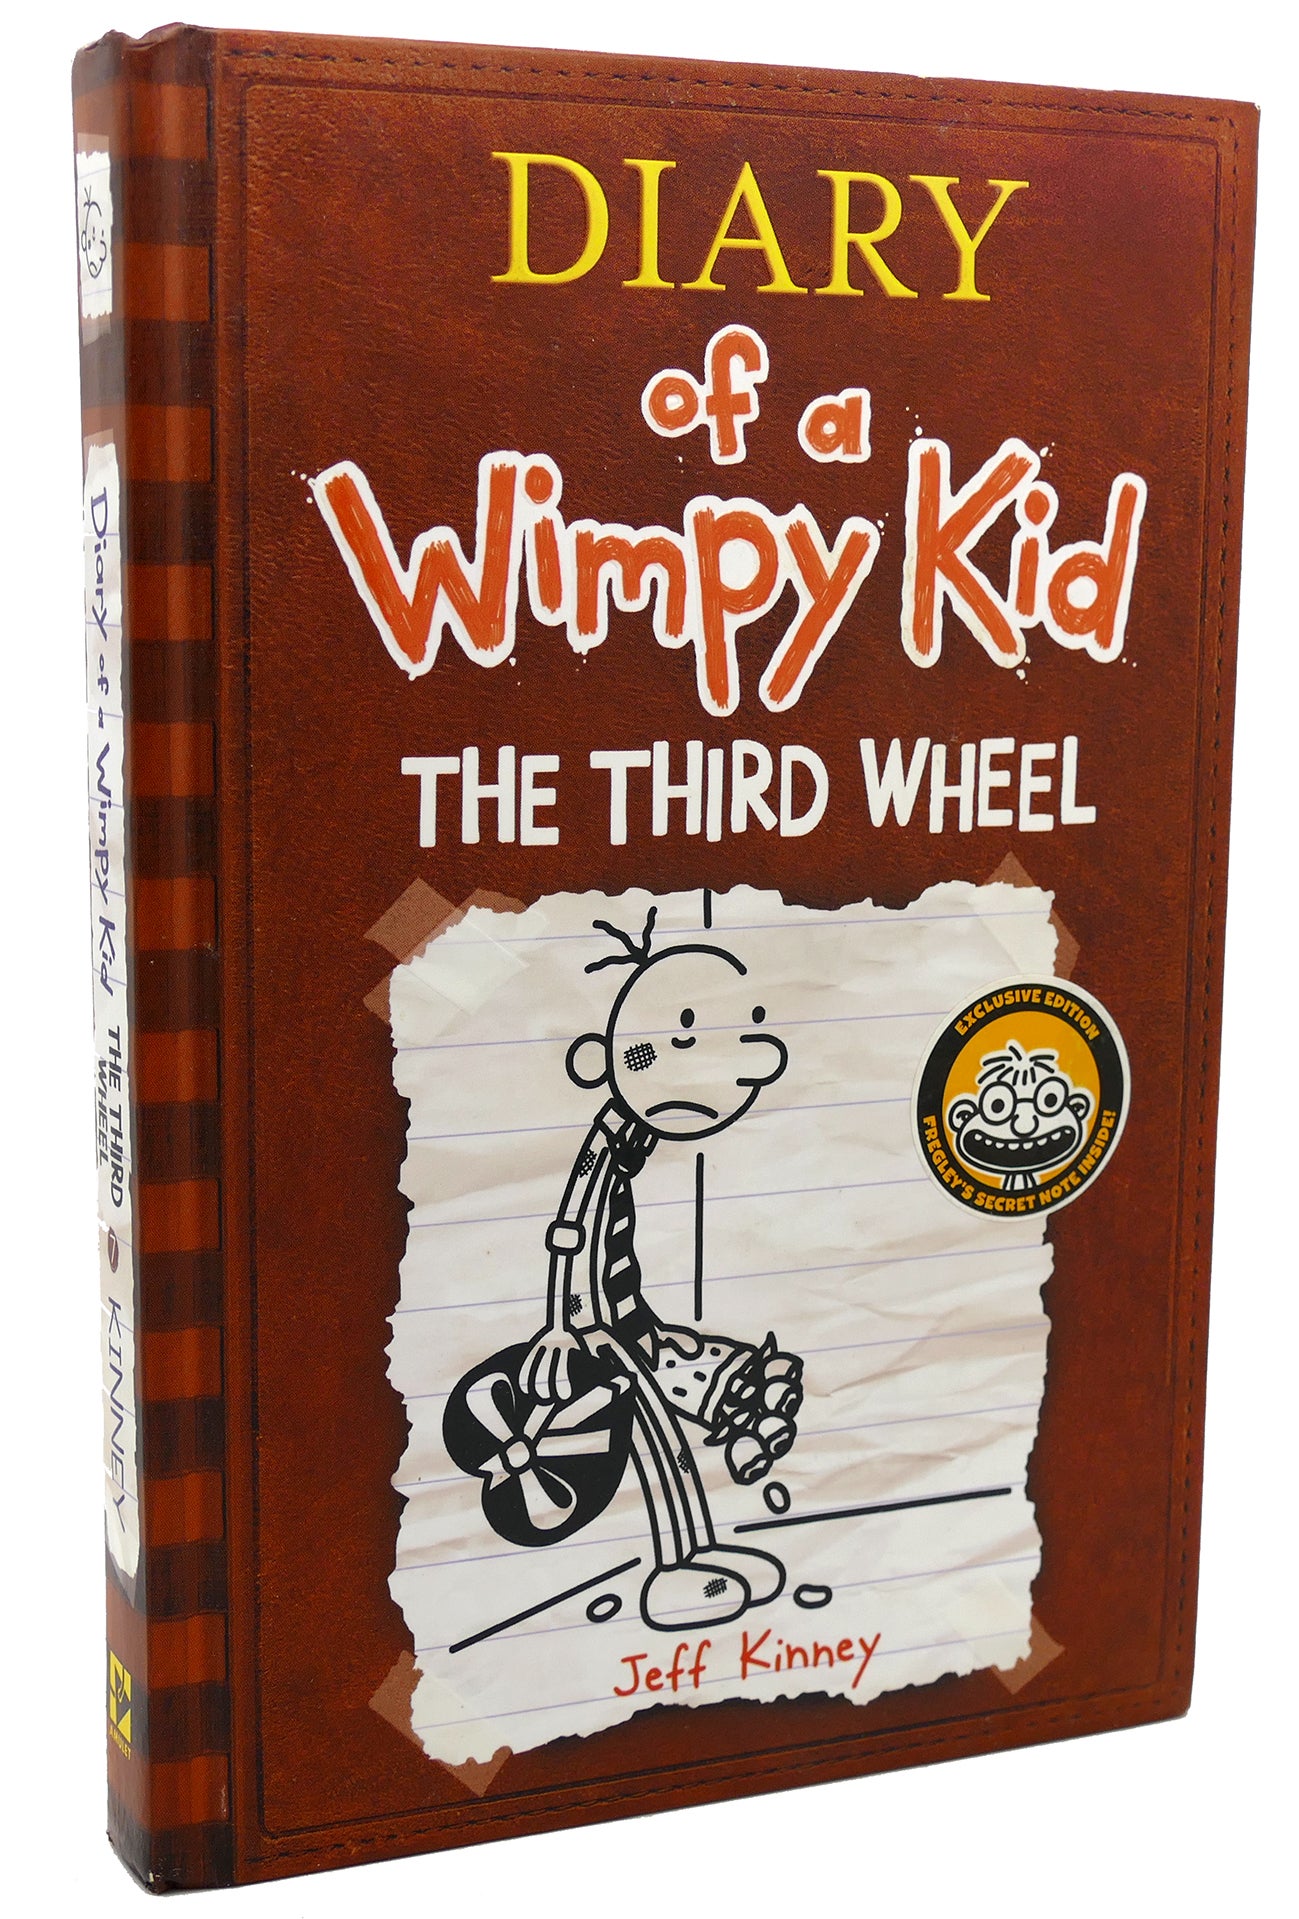 DIARY OF A WIMPY KID THE THIRD WHEEL | Jeff Kinney | First Edition 